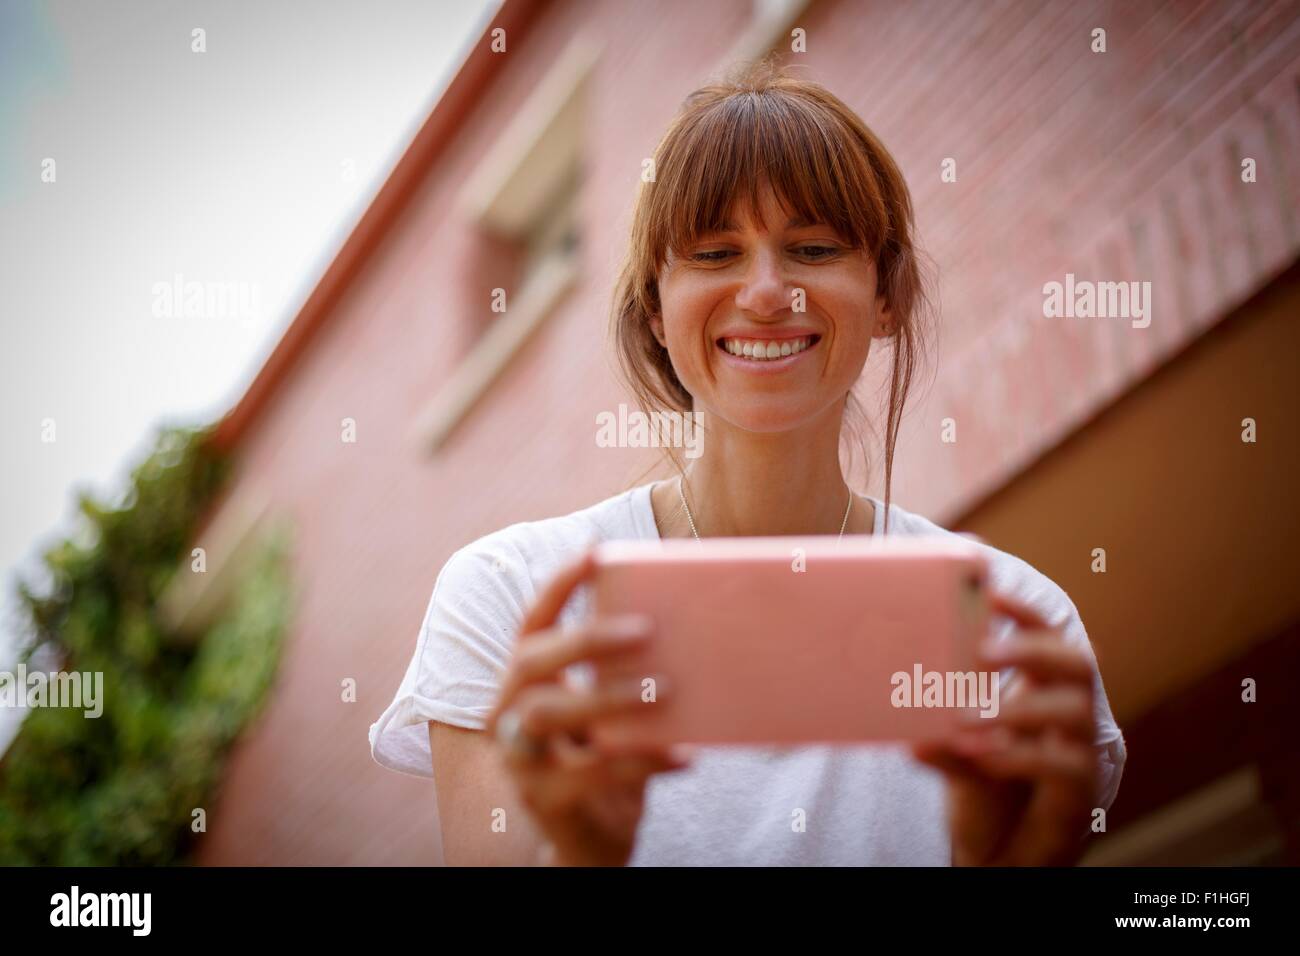 Faible et view of mid adult woman using smartphone, smiling Banque D'Images